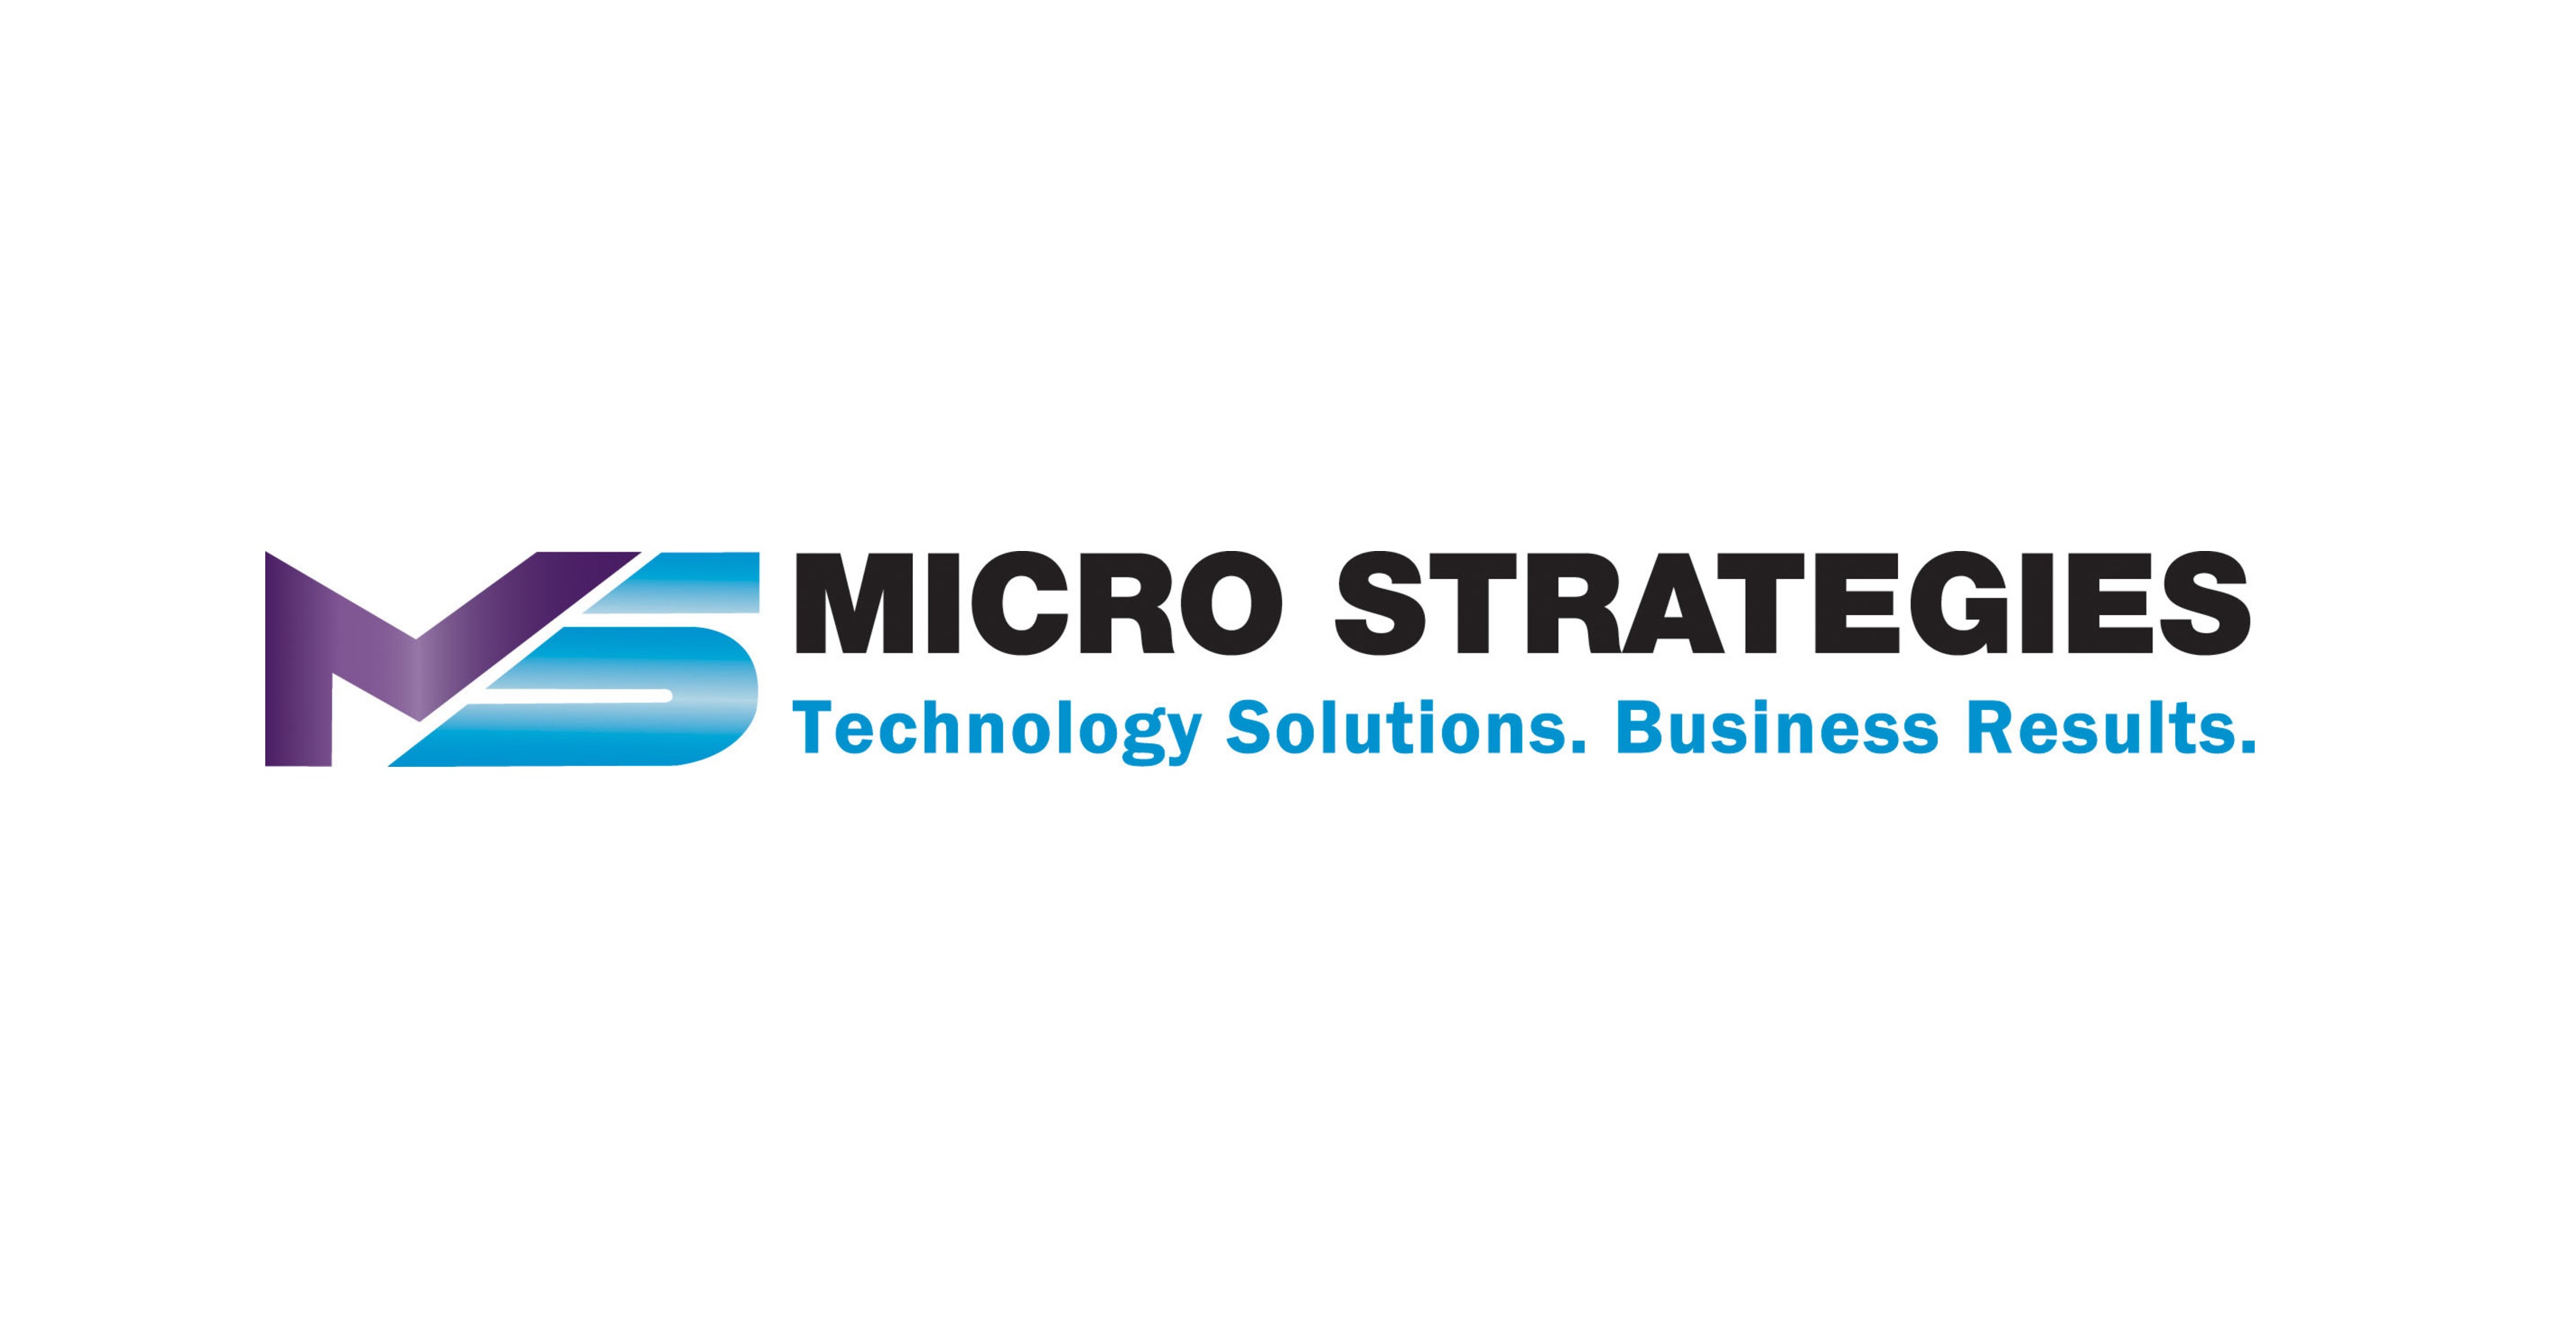 MICRO STRATEGIES INC. Technology Solutions. Business Results.